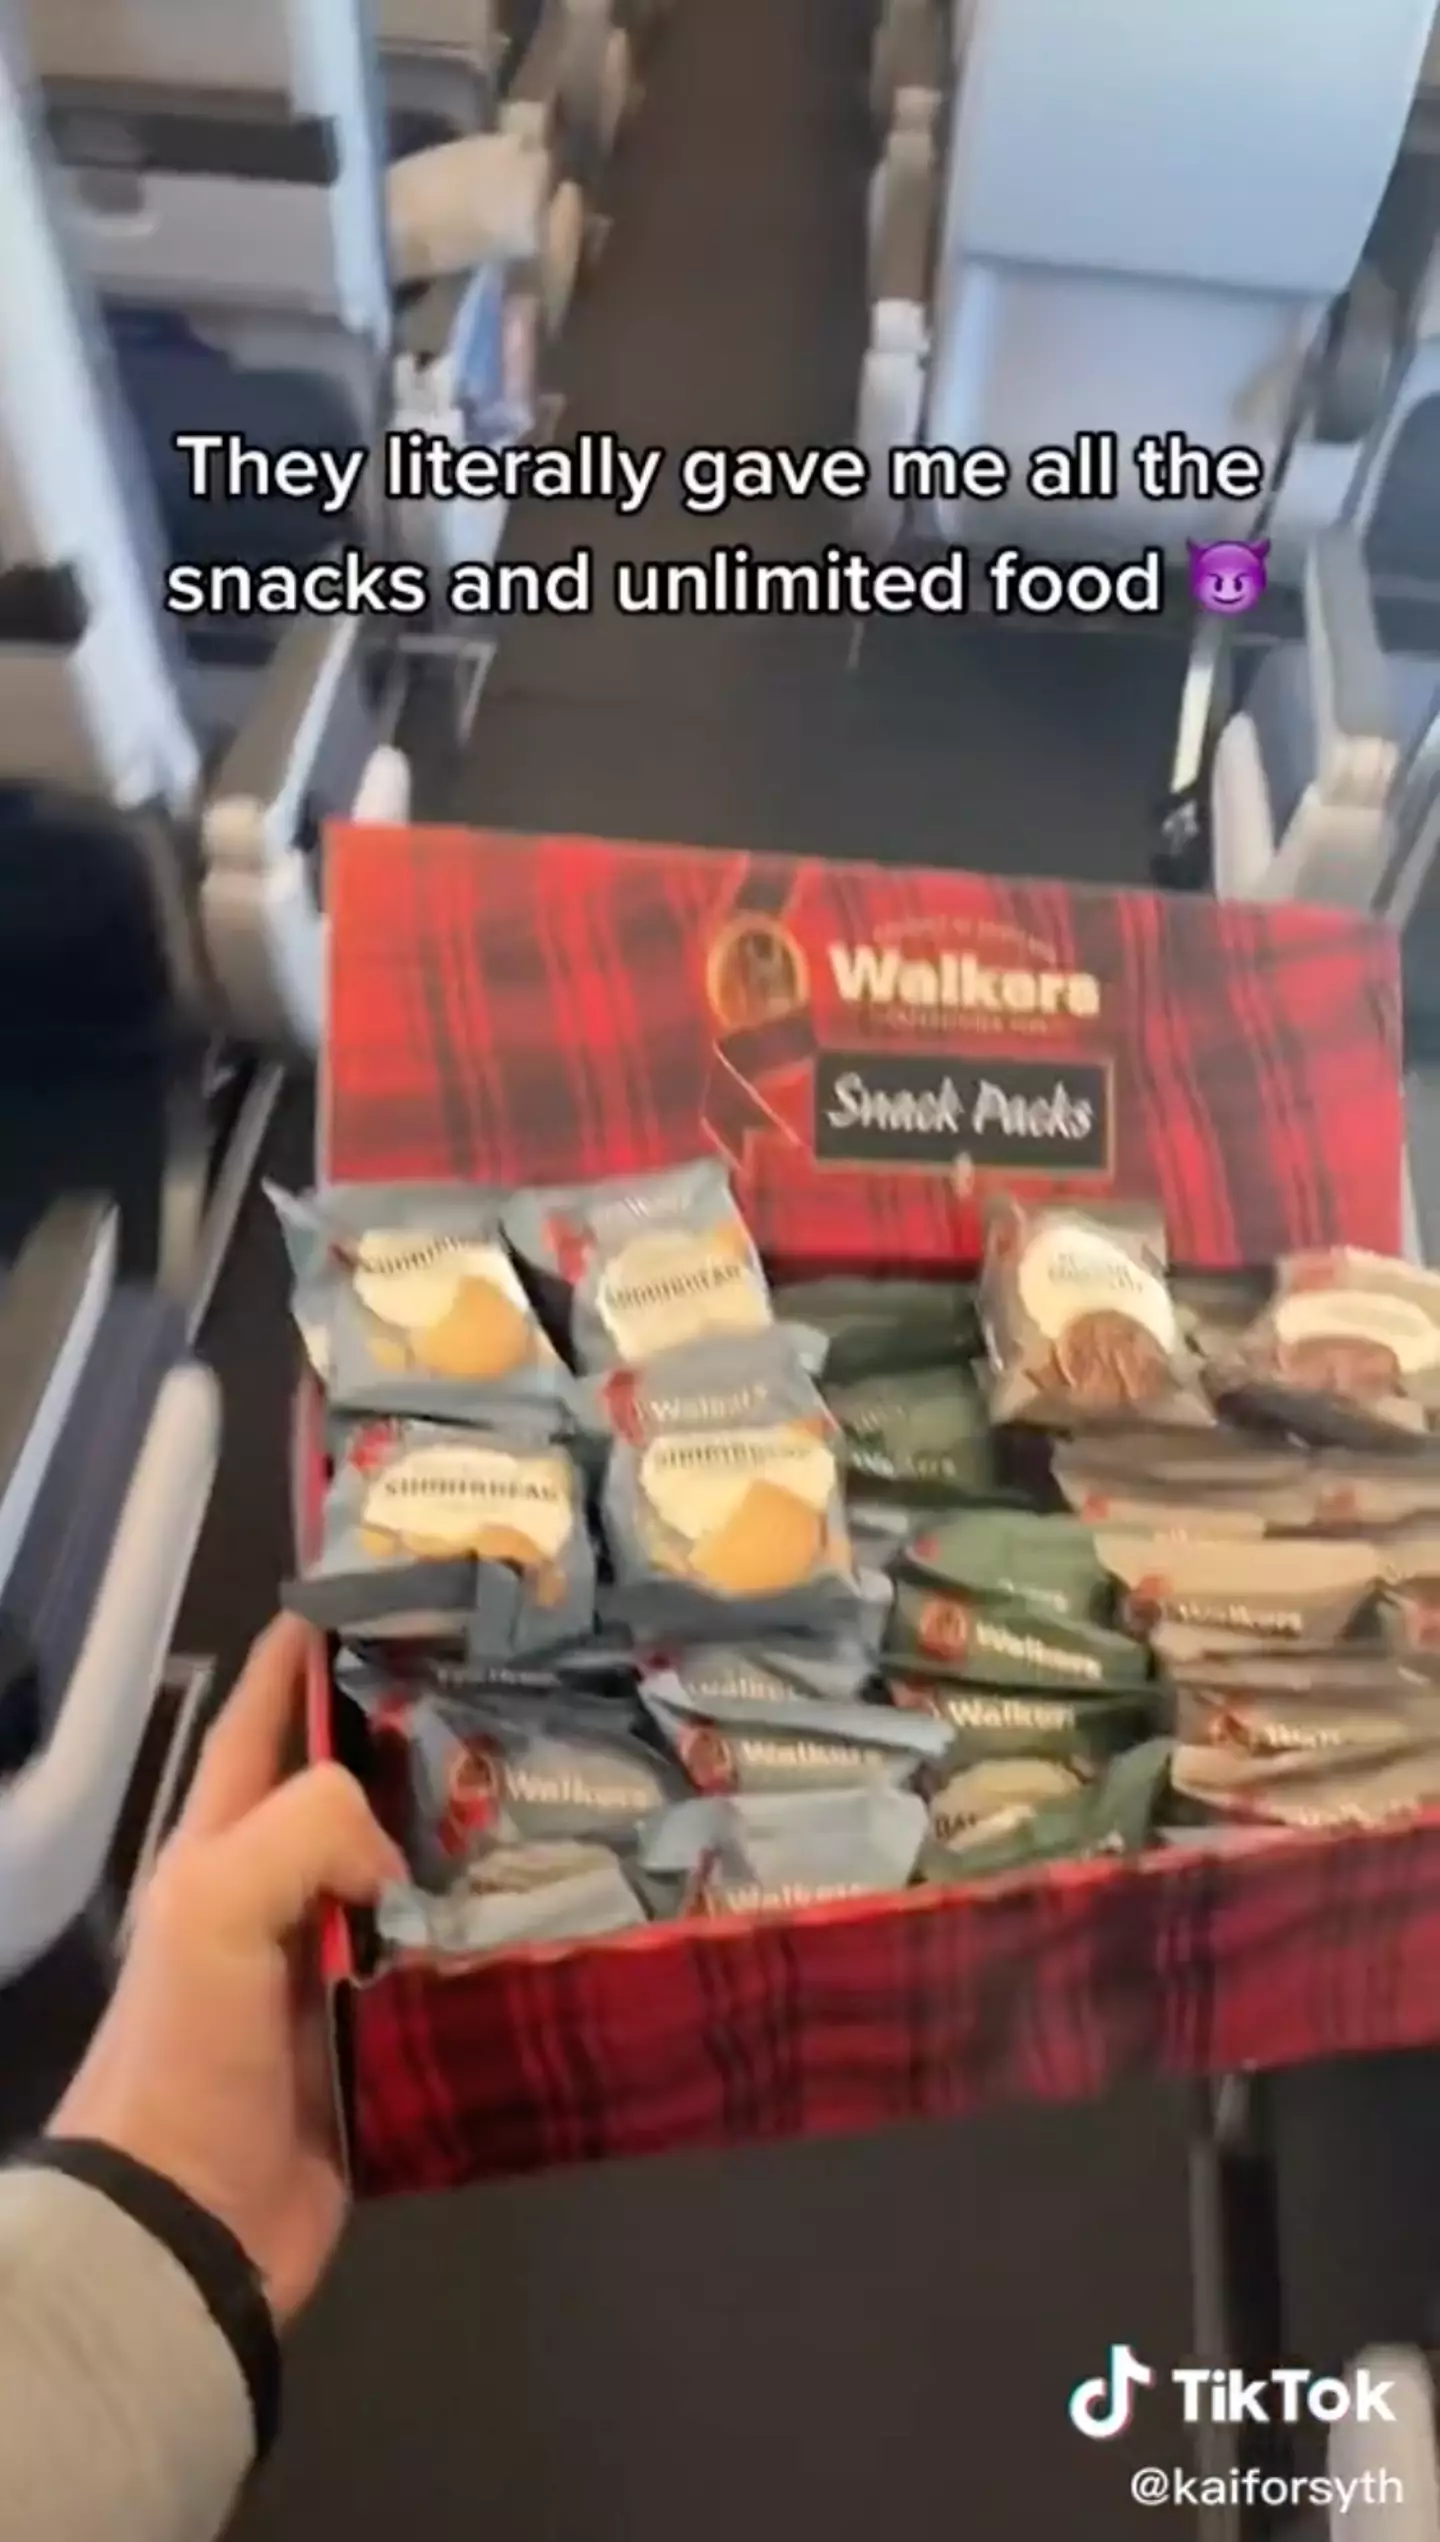 Kai was given 'unlimited food and snacks'.